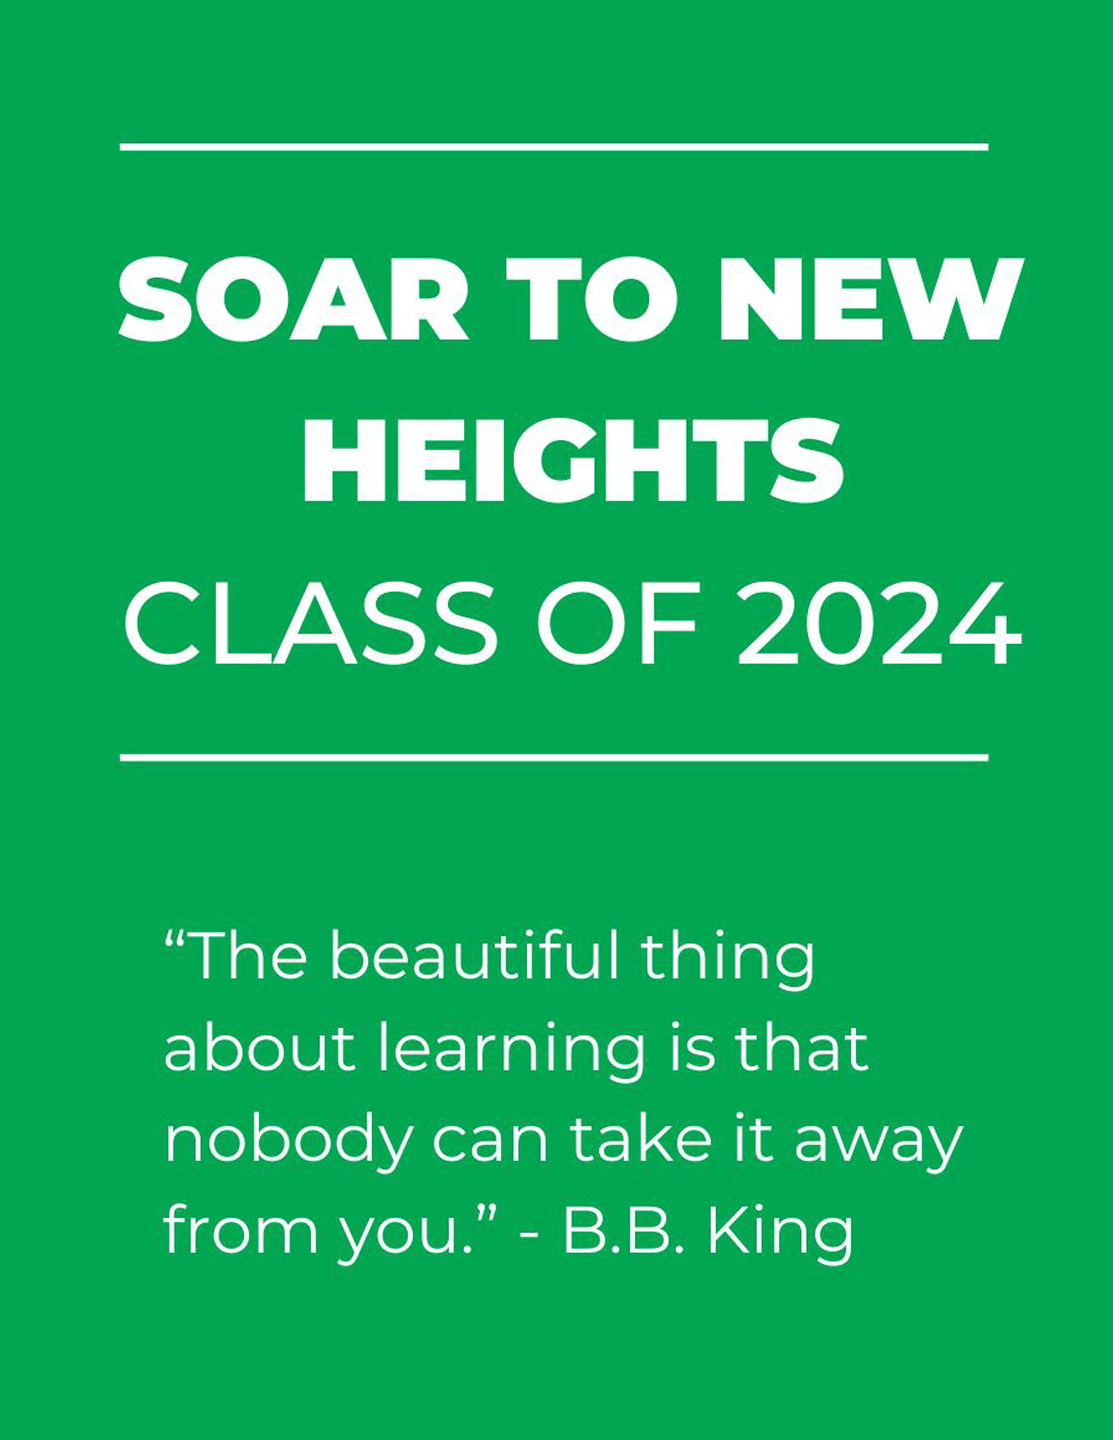 Soar to New Heights Class of 2024. The beautiful thing about learning is that nobody can take it away from you. Quote from B.B. King